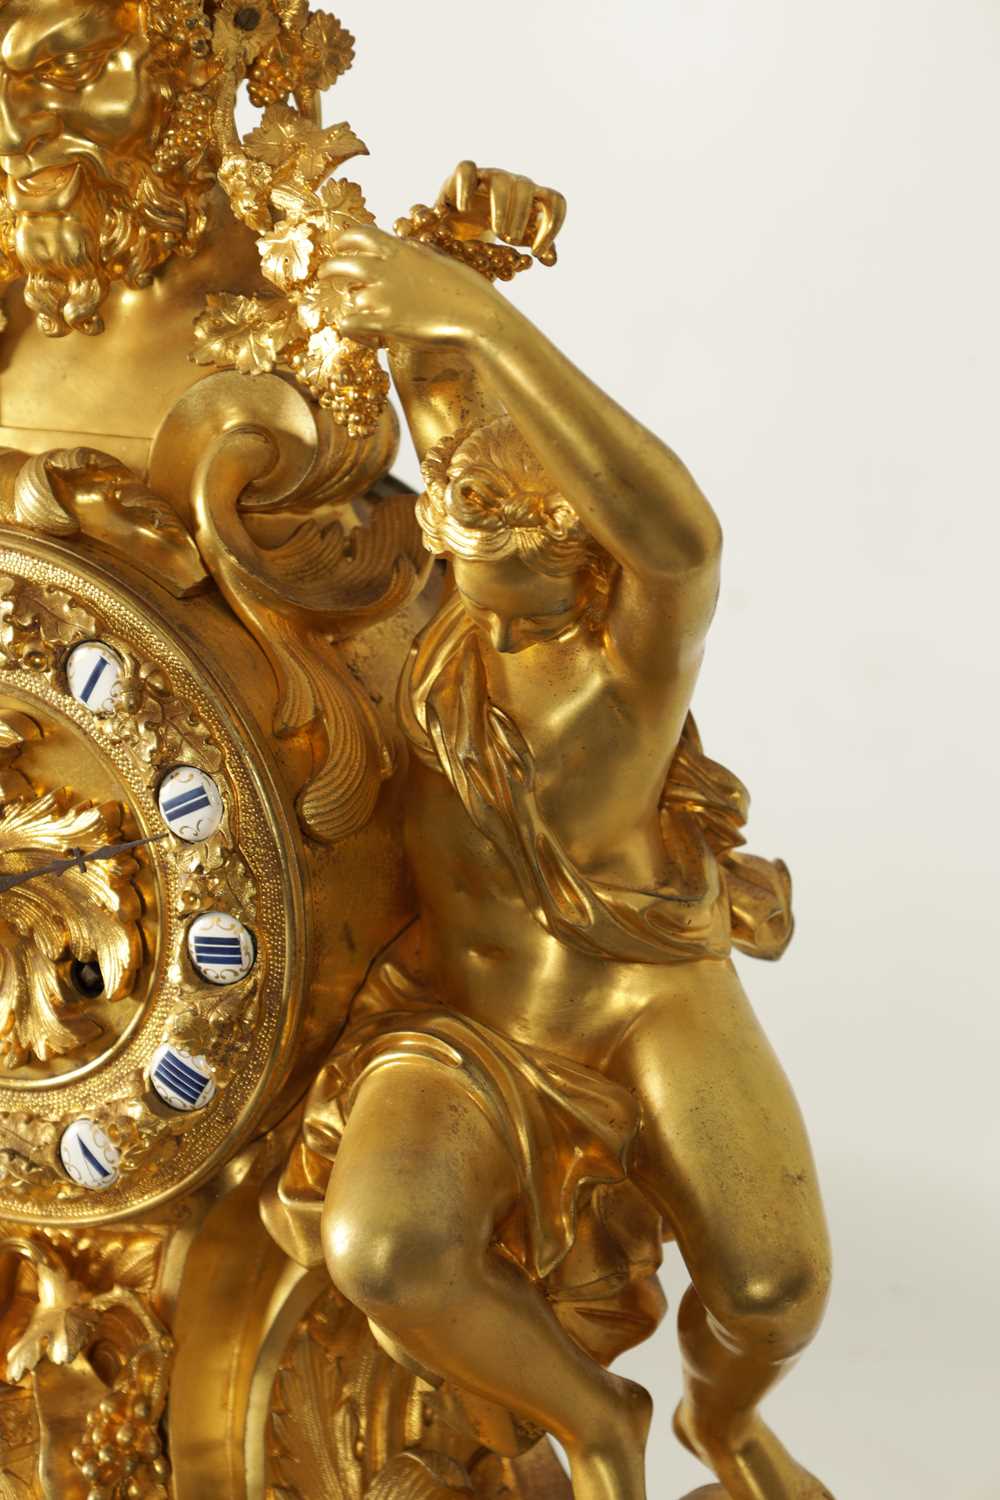 A FINE QUALITY MID 19TH CENTURY FRENCH ORMOLU FIGURAL MANTEL CLOCK - Image 6 of 11